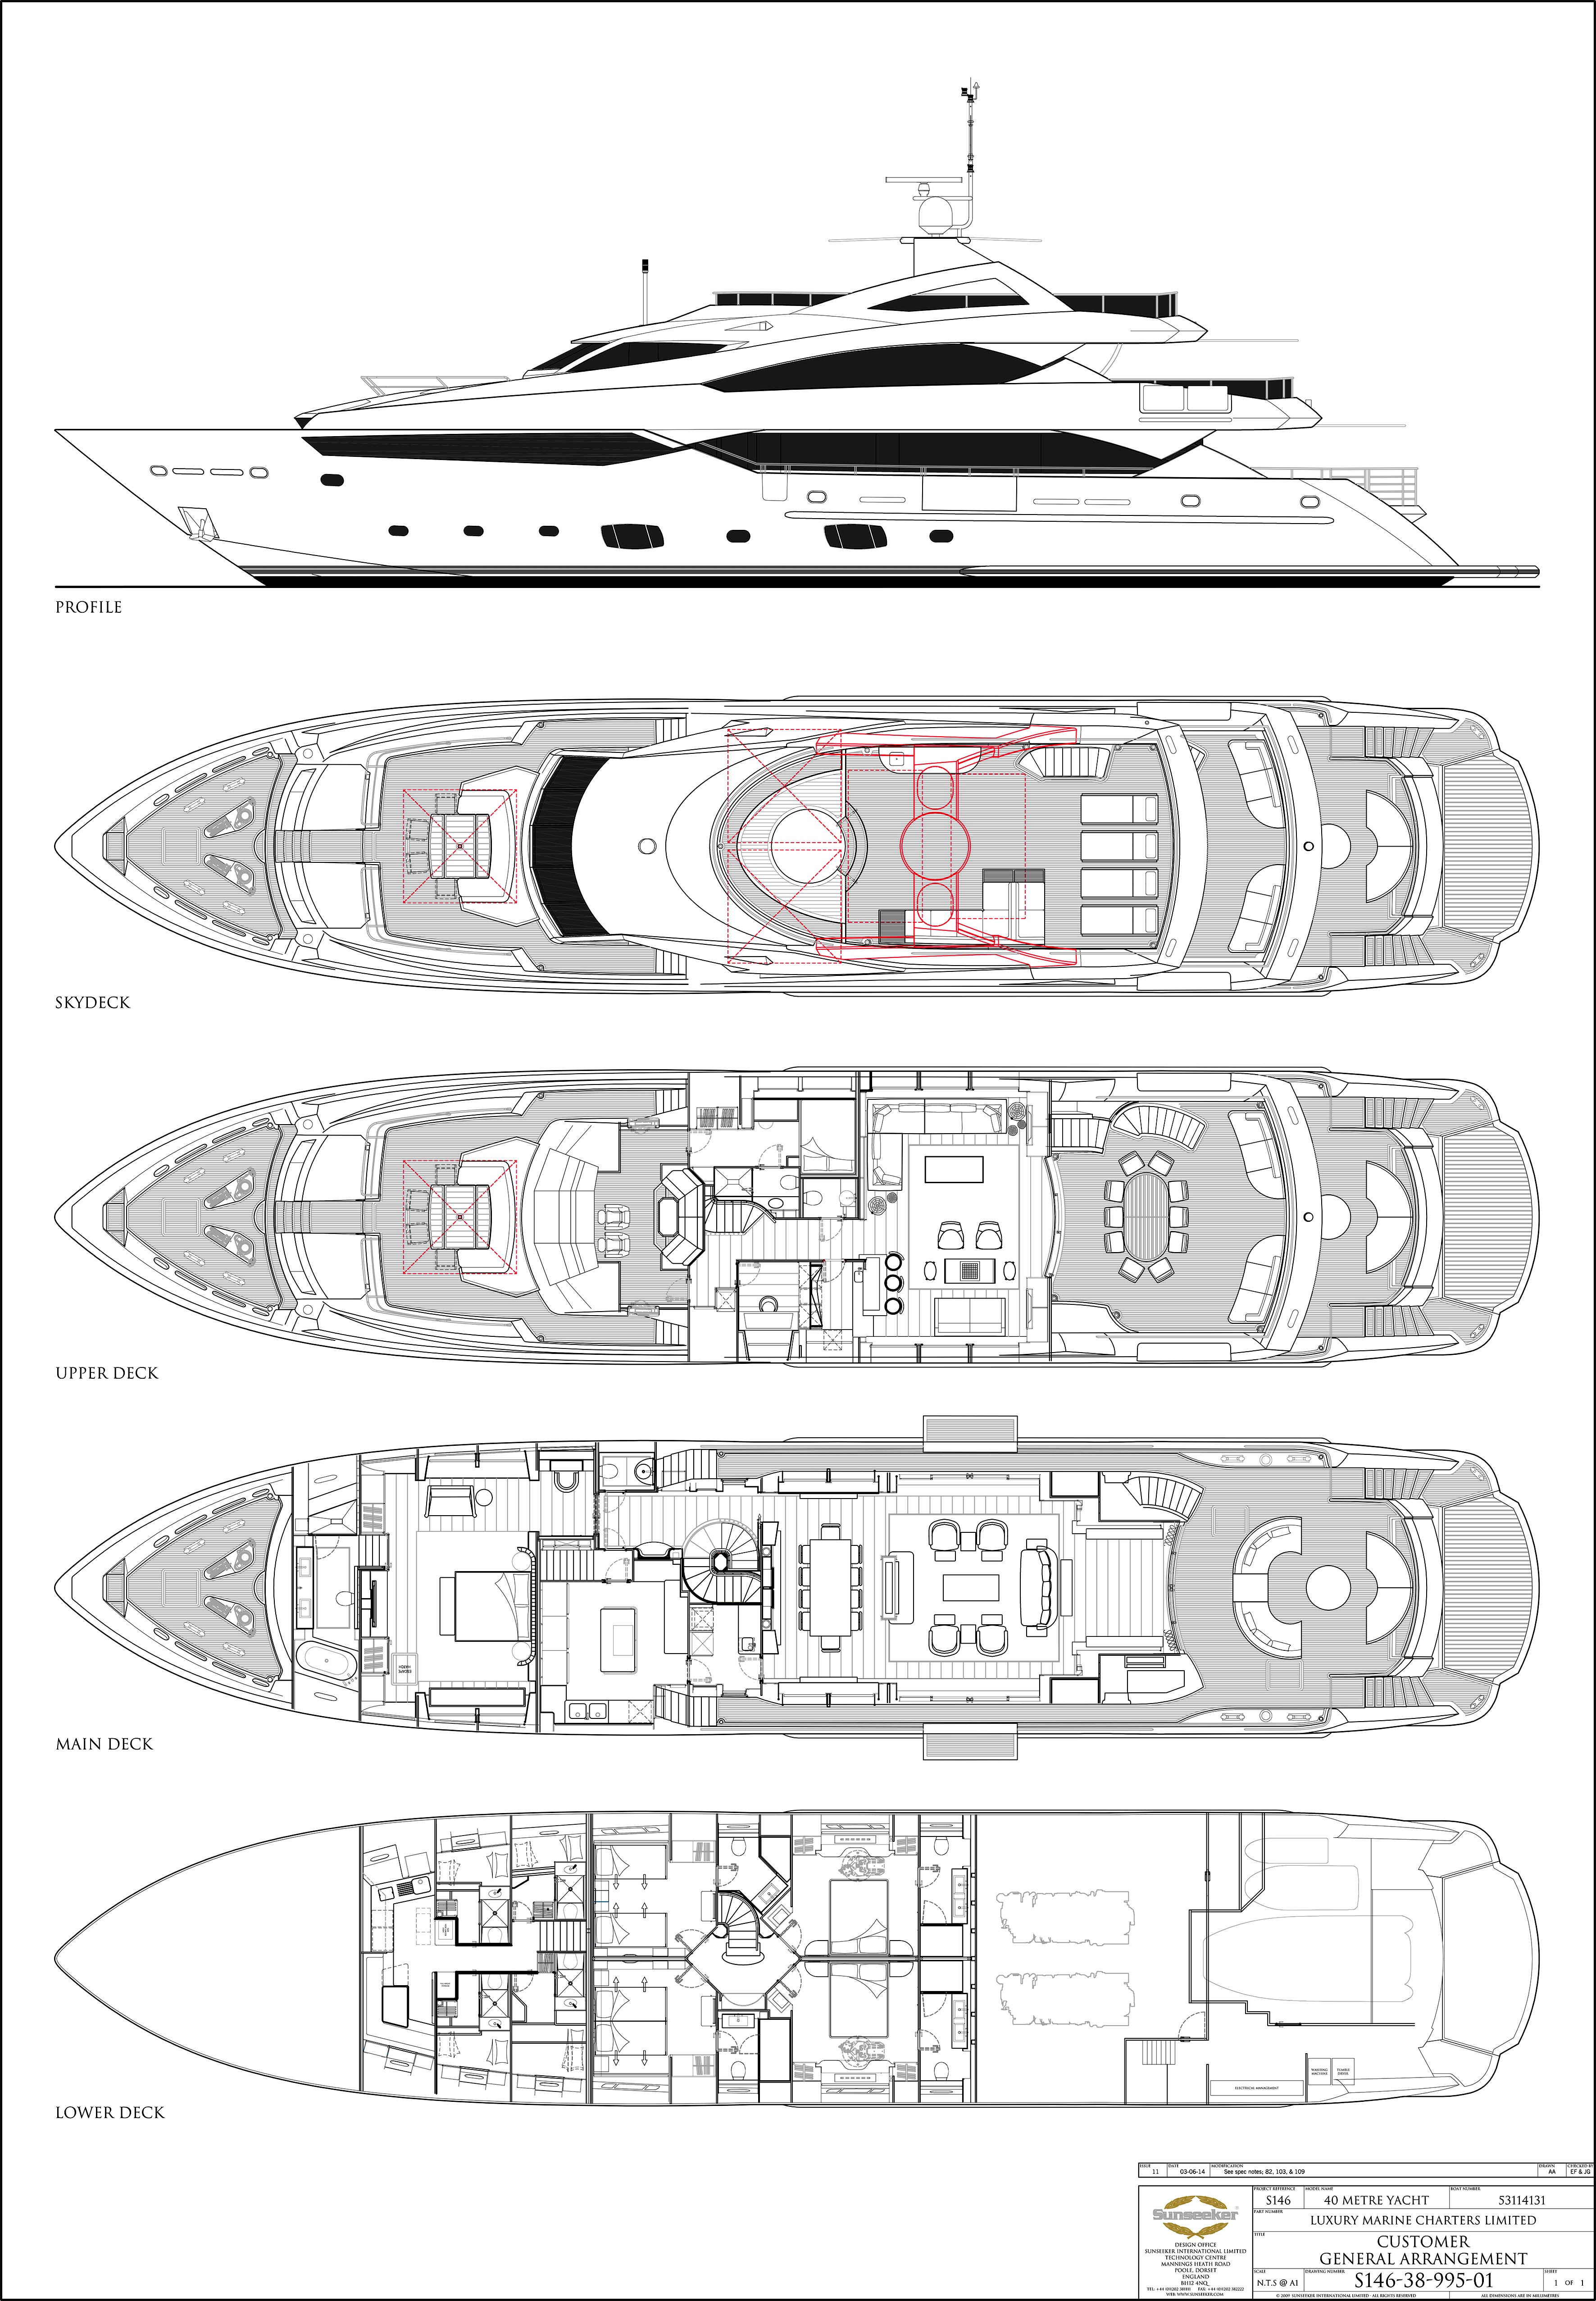 The 40m Yacht THUMPER